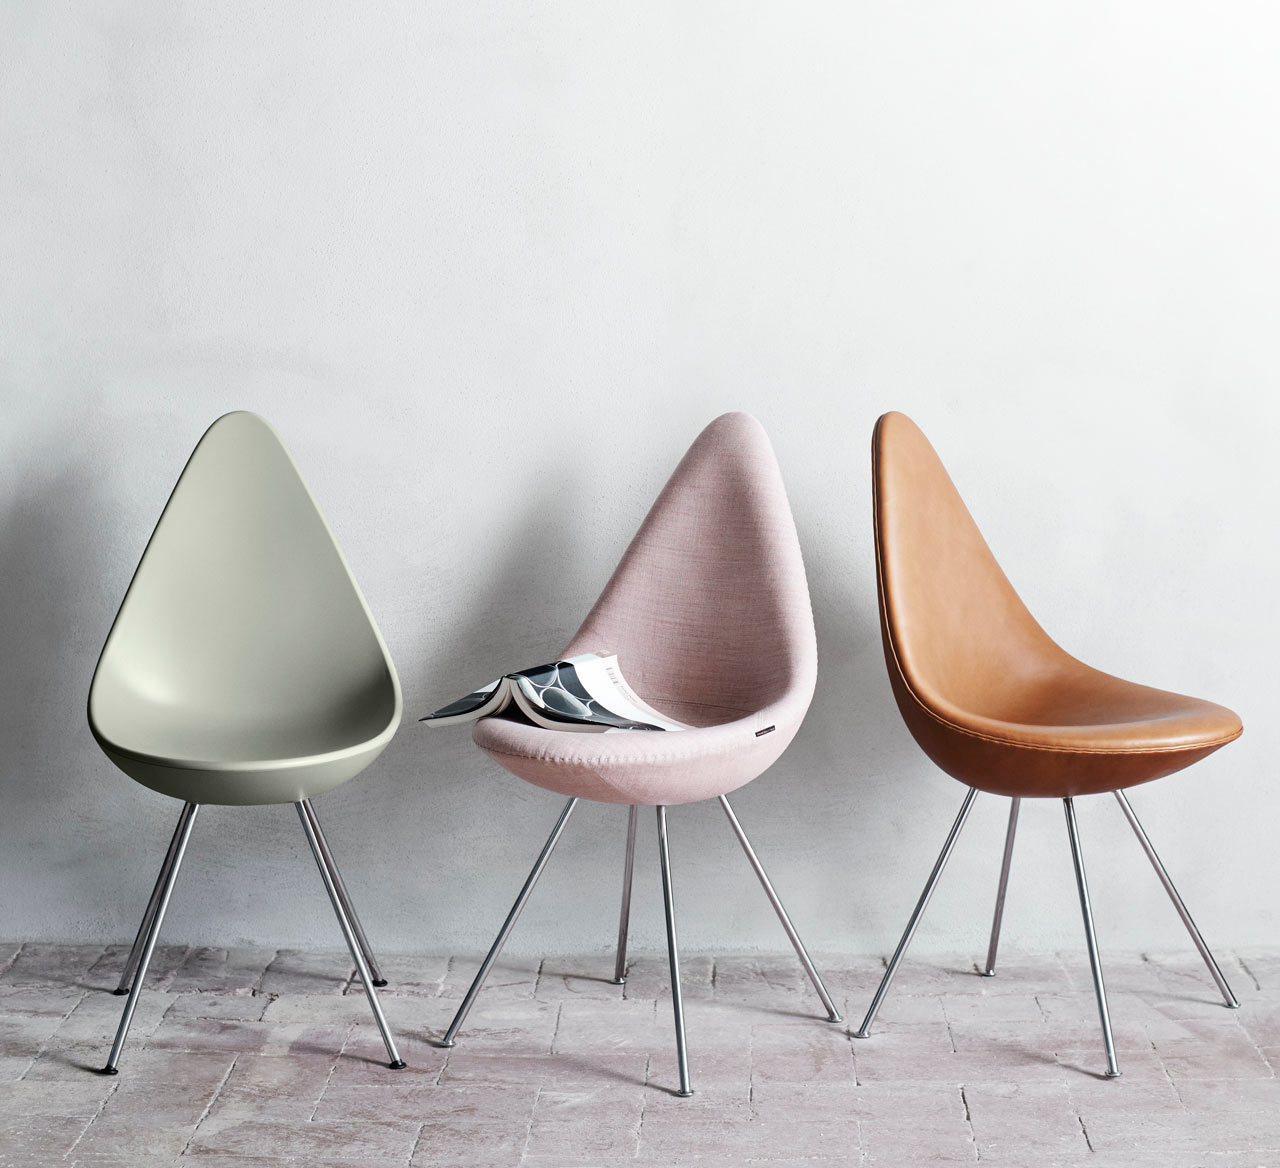 Arne Jacobsen's Drop Chair Comes Back to Life